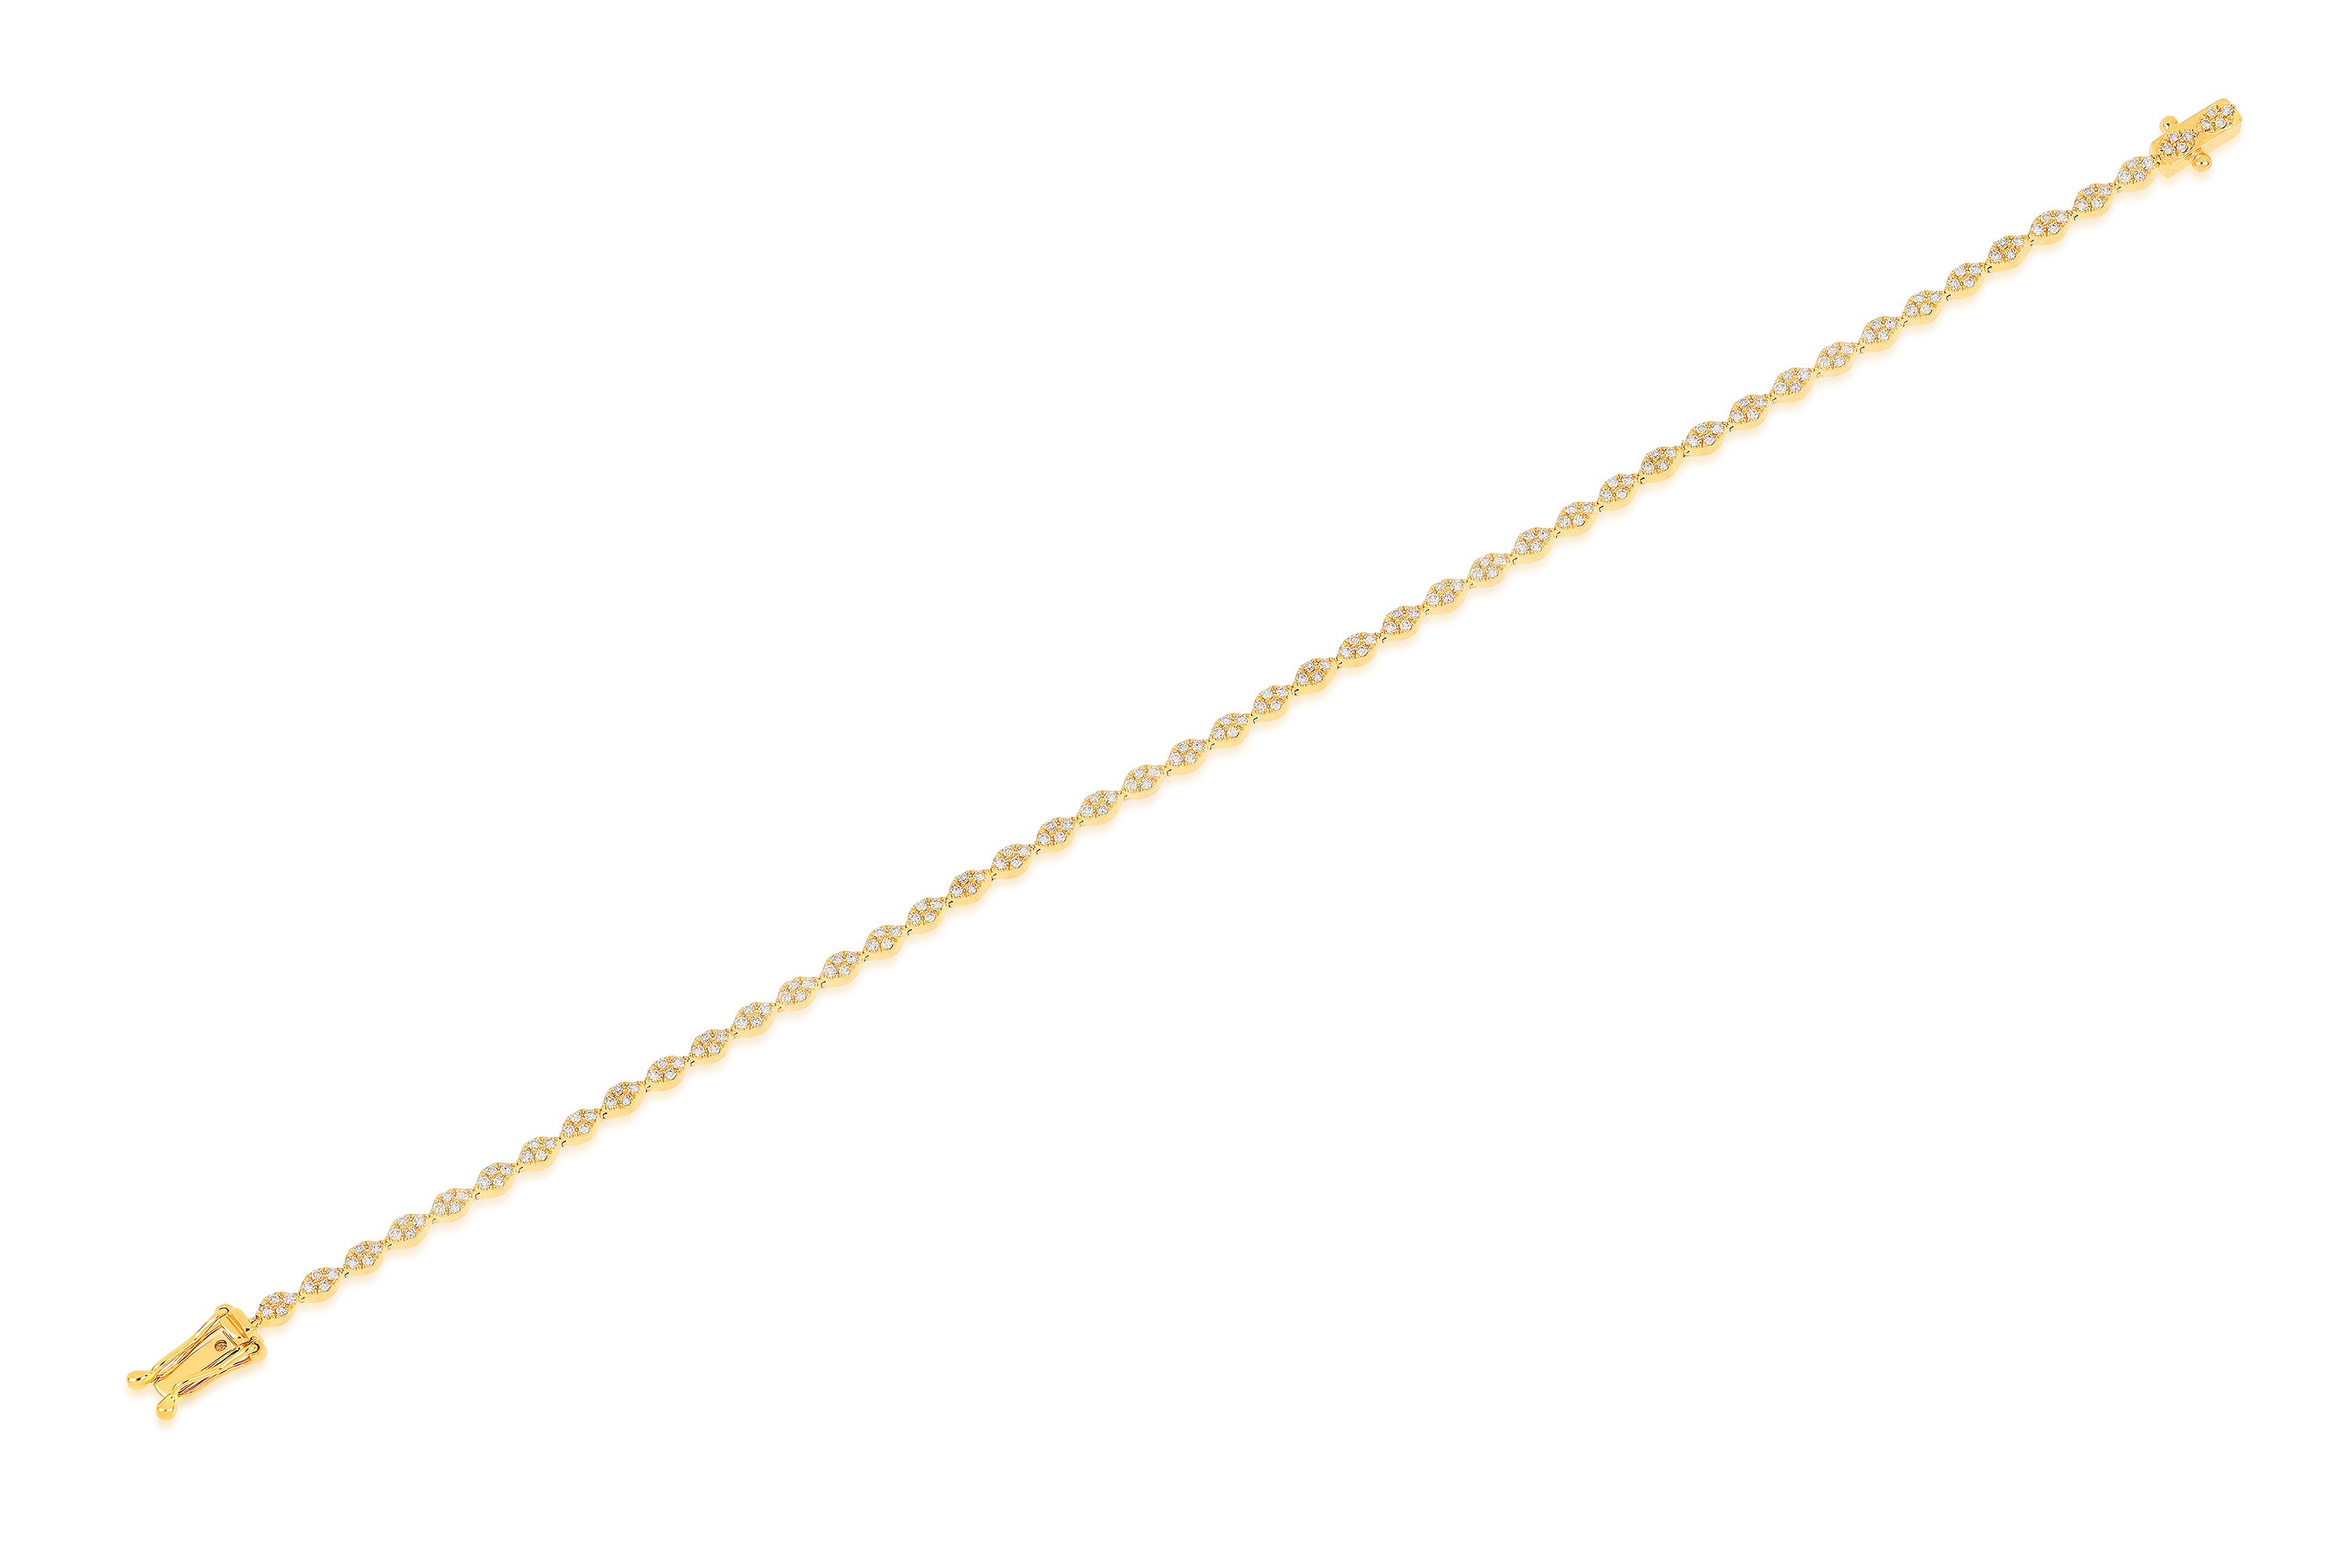 Pave Diamond Marquise Eternity Bracelet in yellow gold